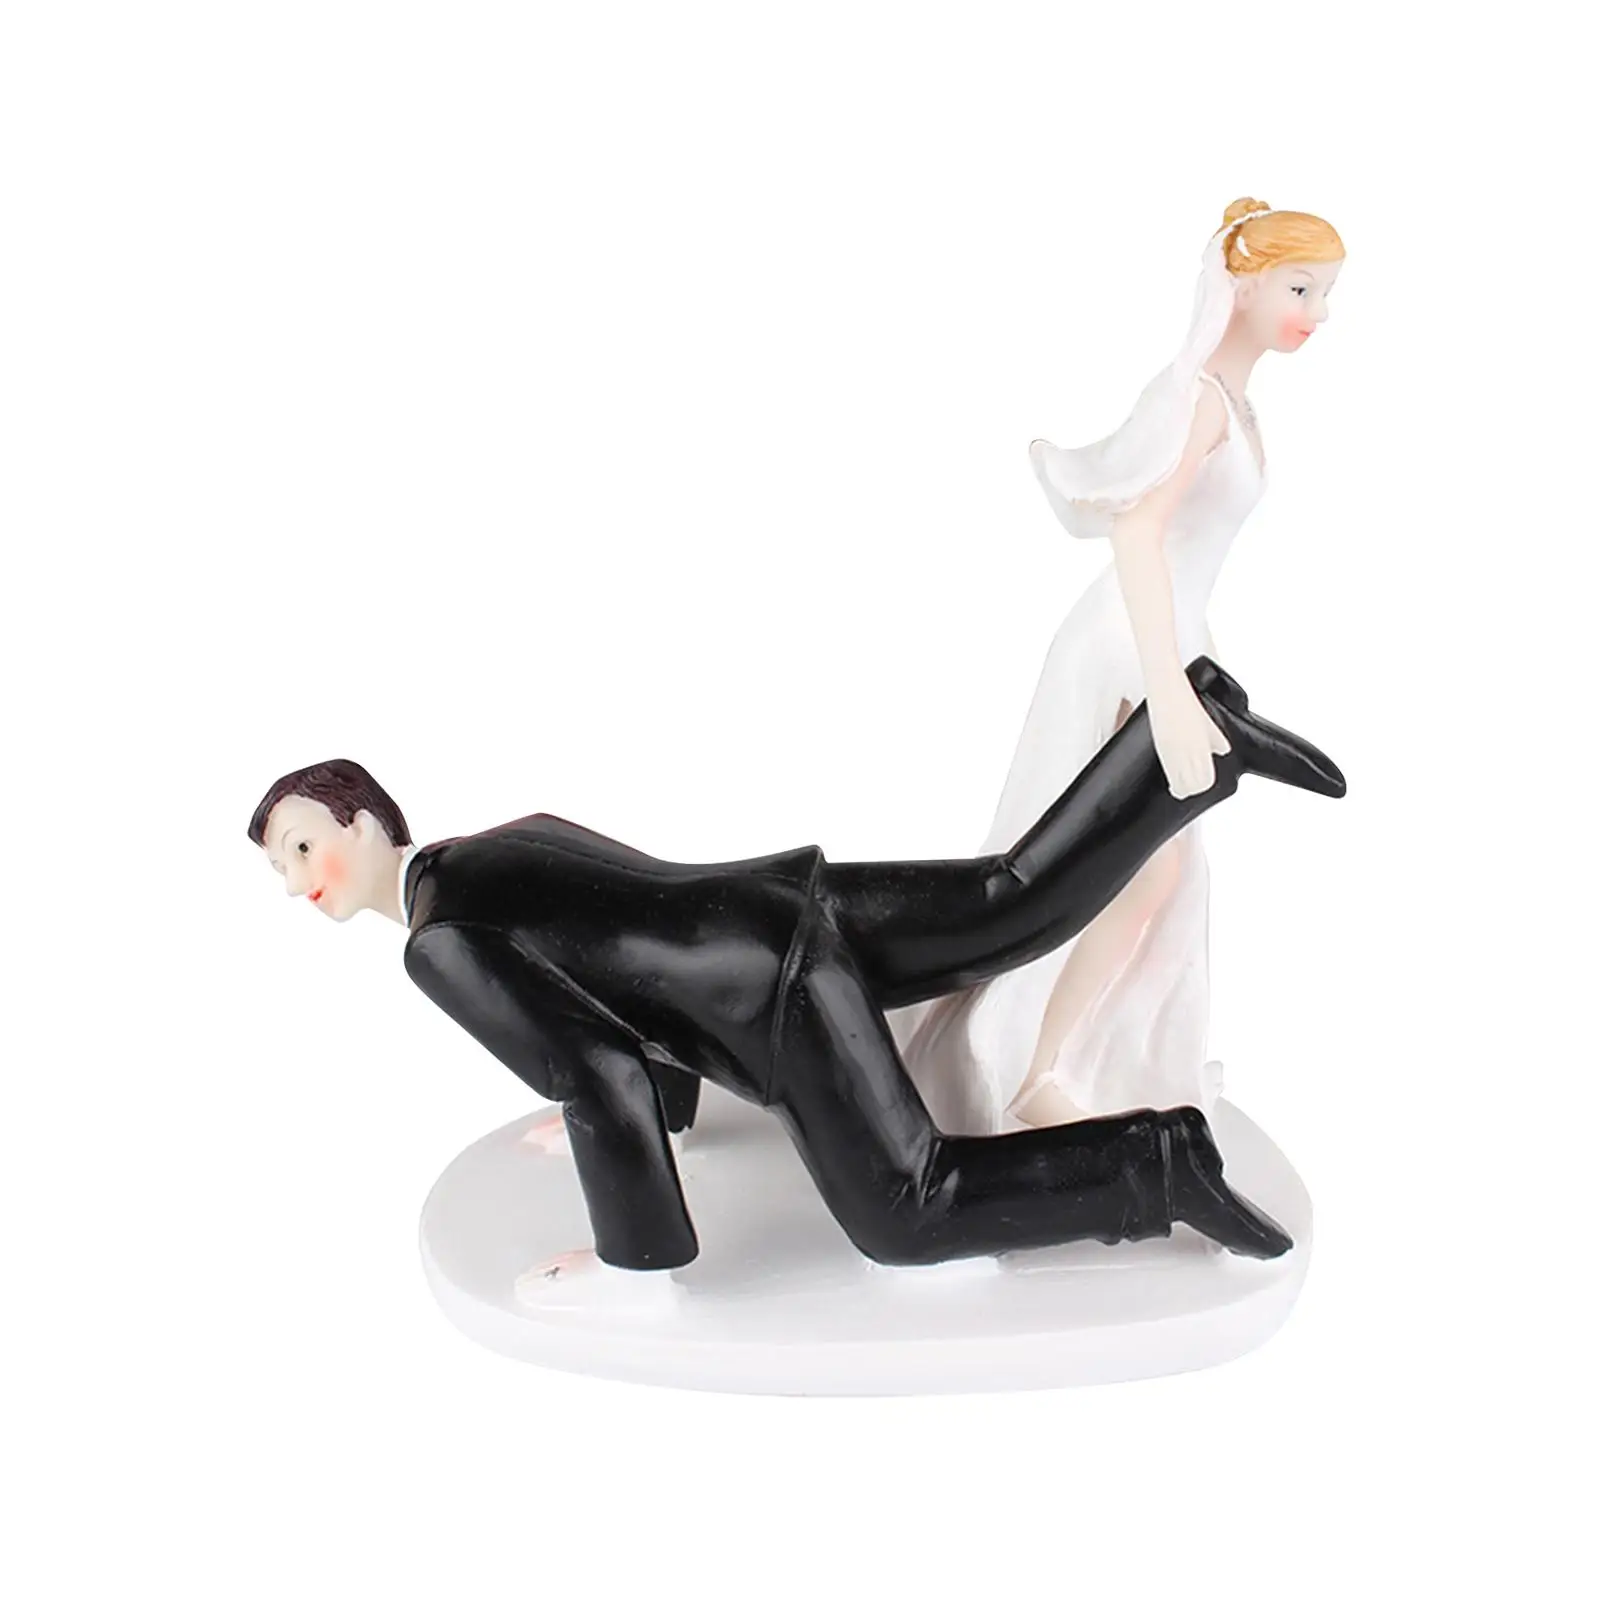 Wedding Cake Topper Ornament Creative Resin Portable Wedding Couple Figurine for Anniversary Tabletop Engagement Decorations